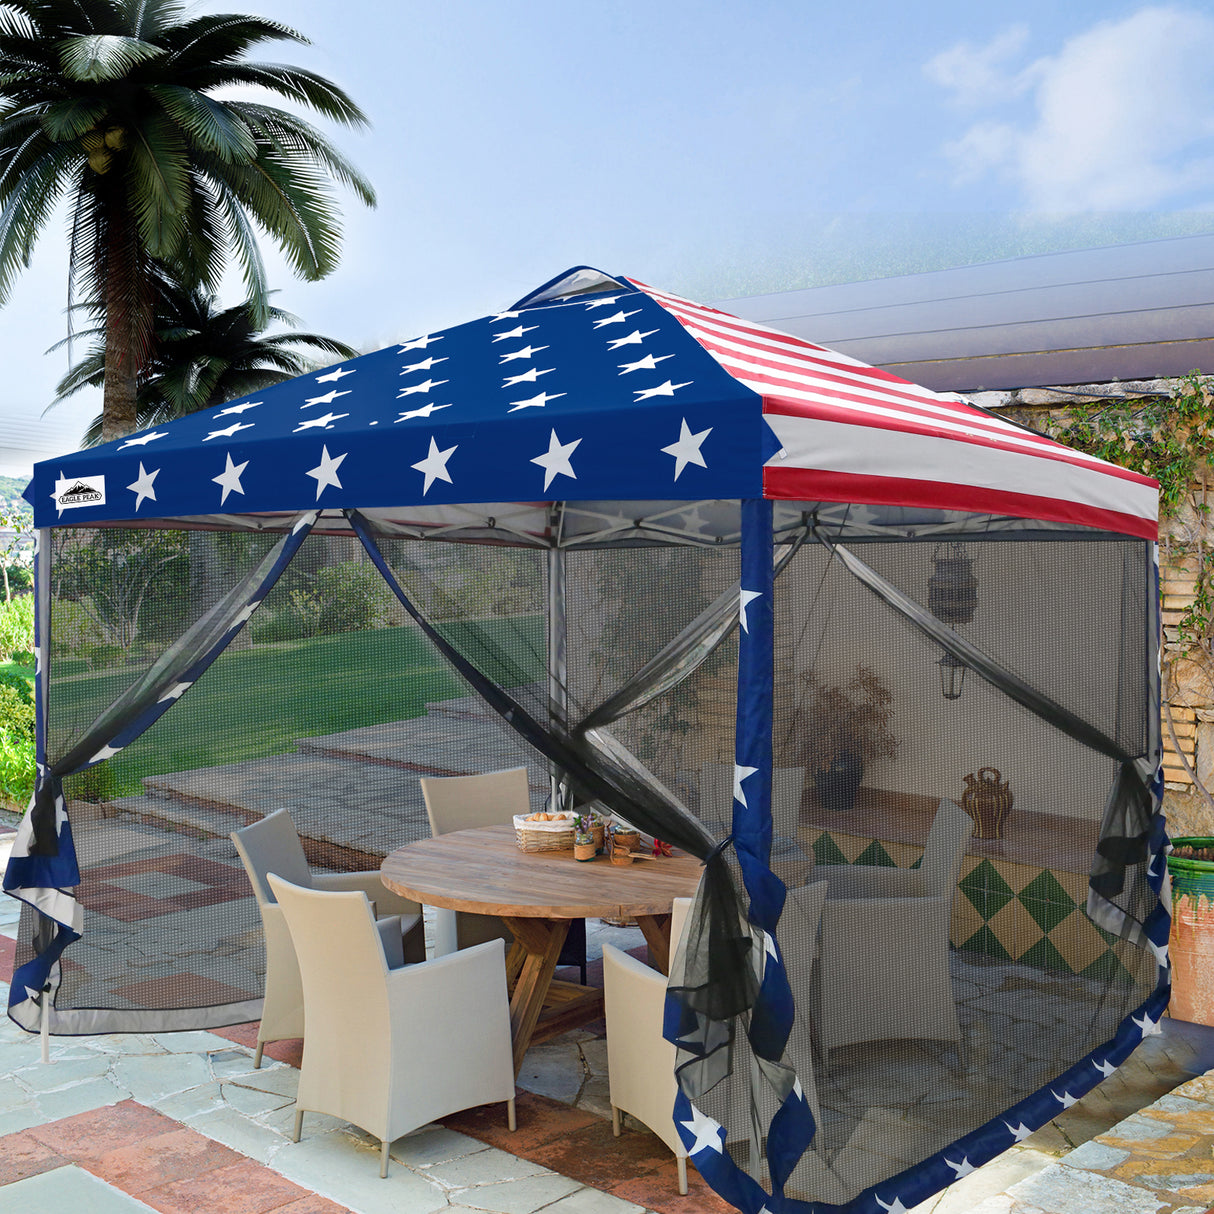 EAGLE PEAK 10x10 Outdoor Easy Pop up Canopy with Netting, Instant Screen Party Tent with Mesh Side Walls, Gray/Beige/American Flag